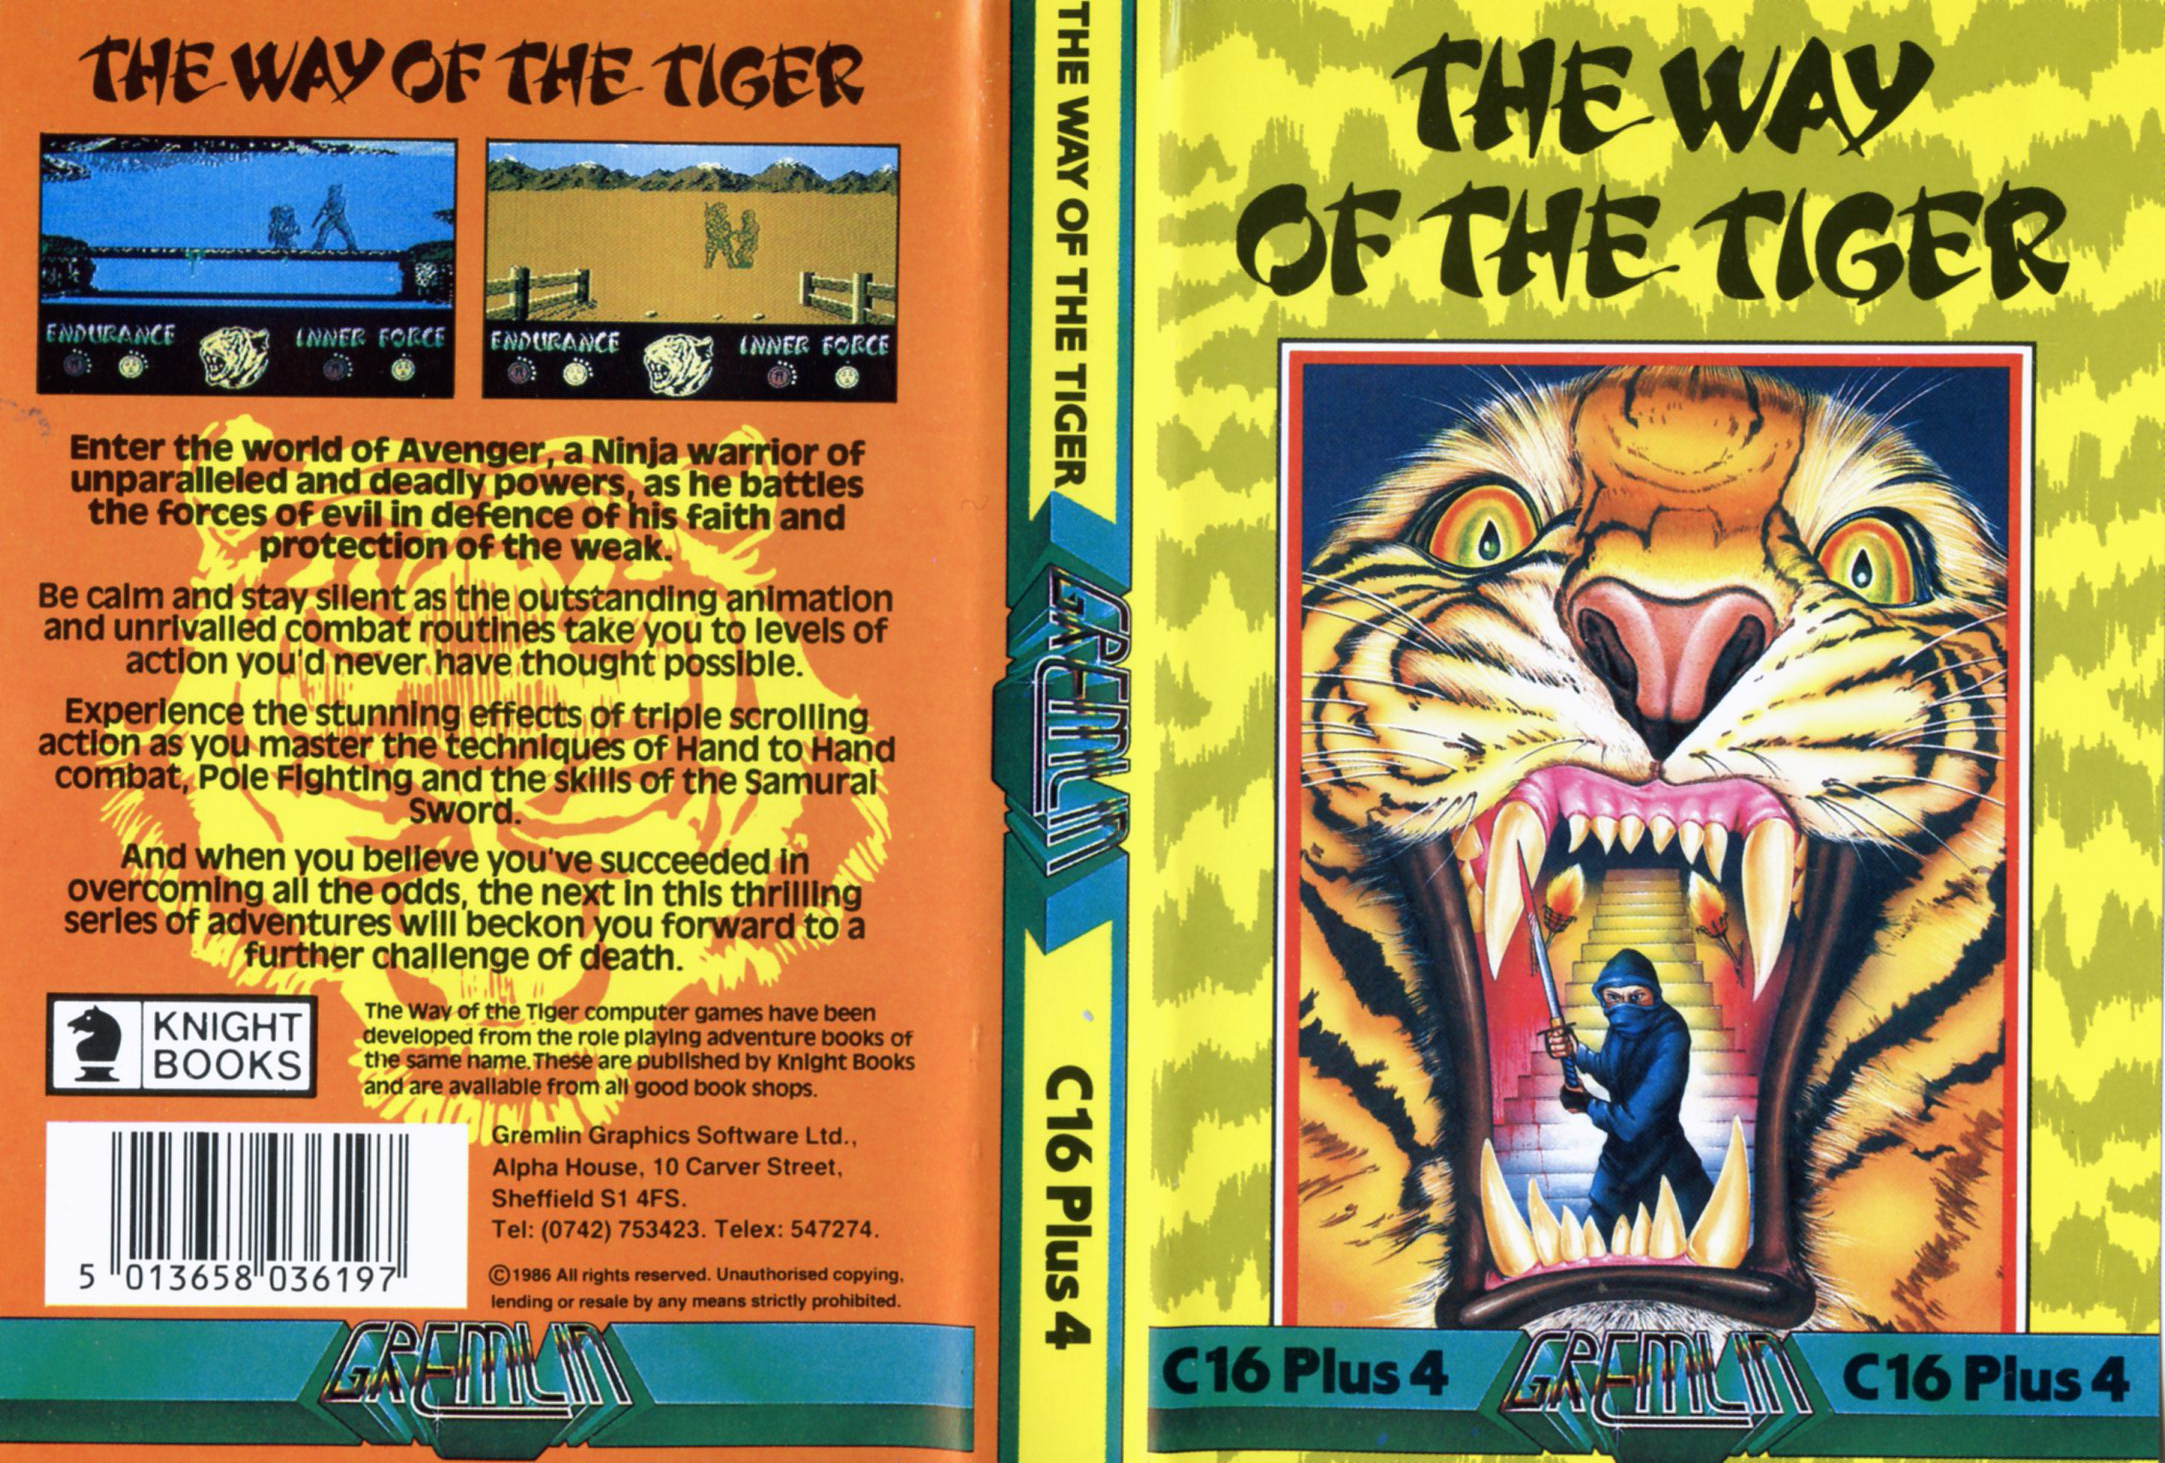 The Way of the Tiger (C16/Plus4)